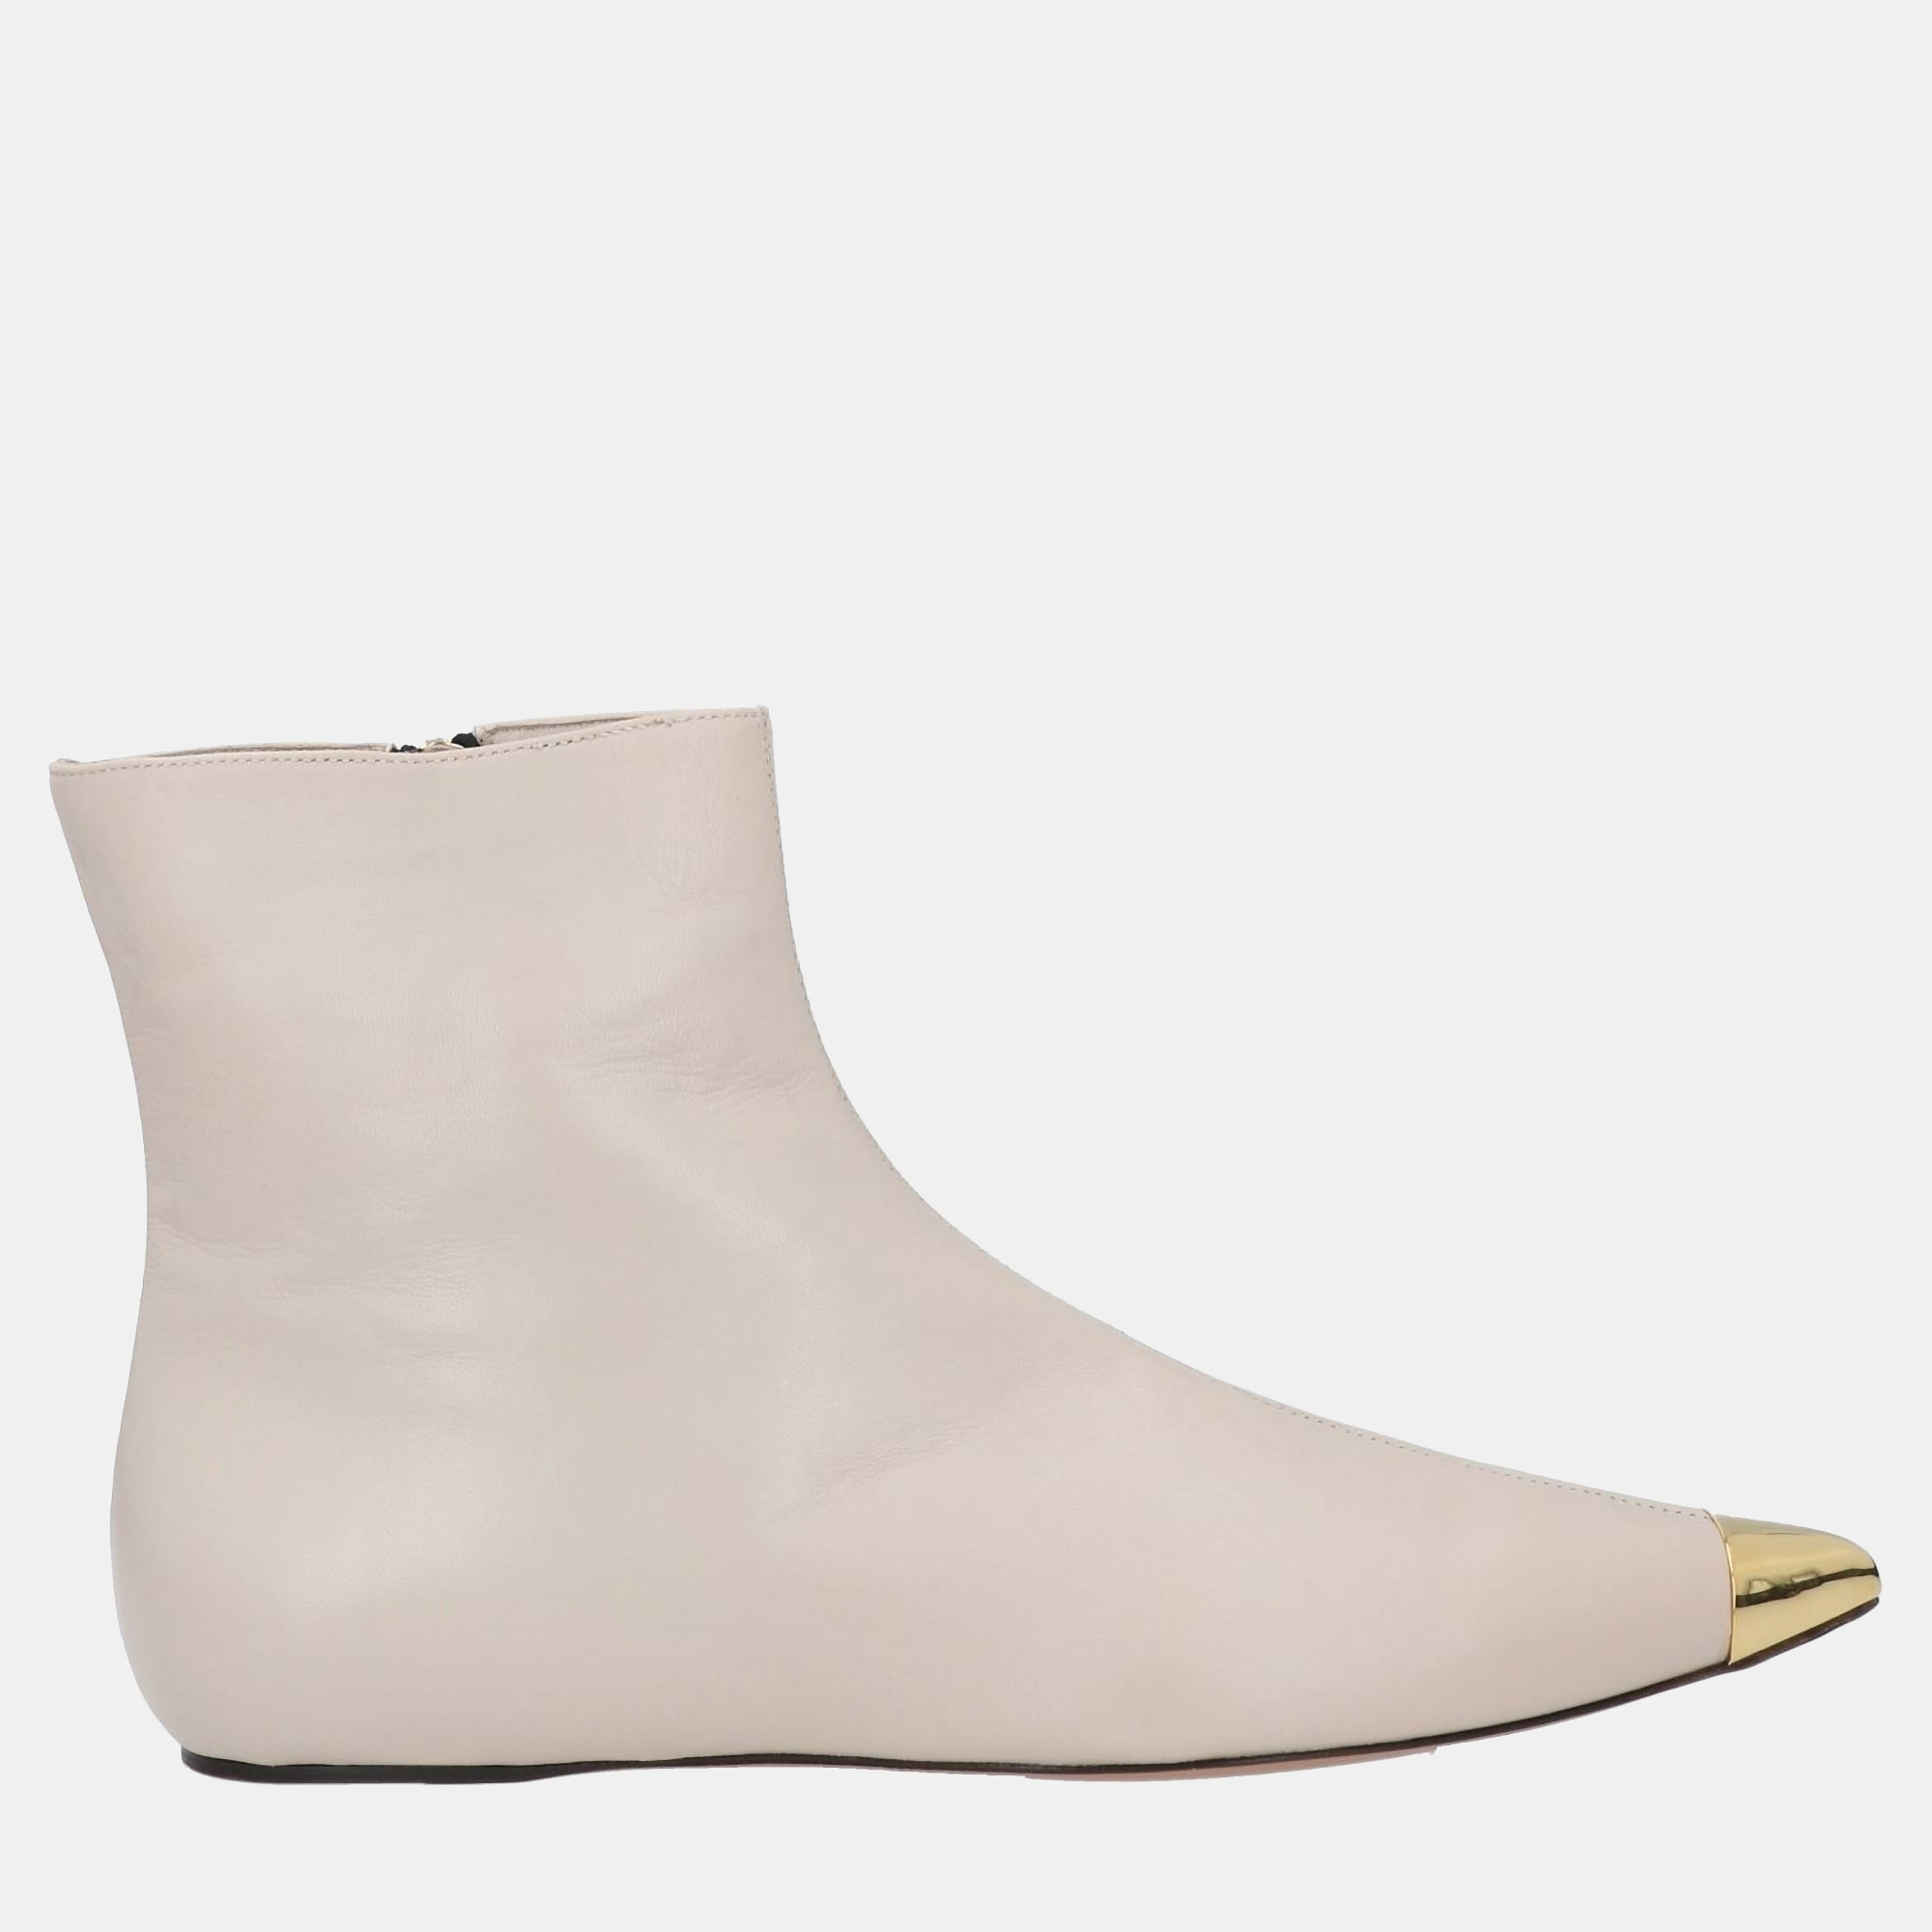 

Marni Leather Leather Ankle Boots Size, Beige